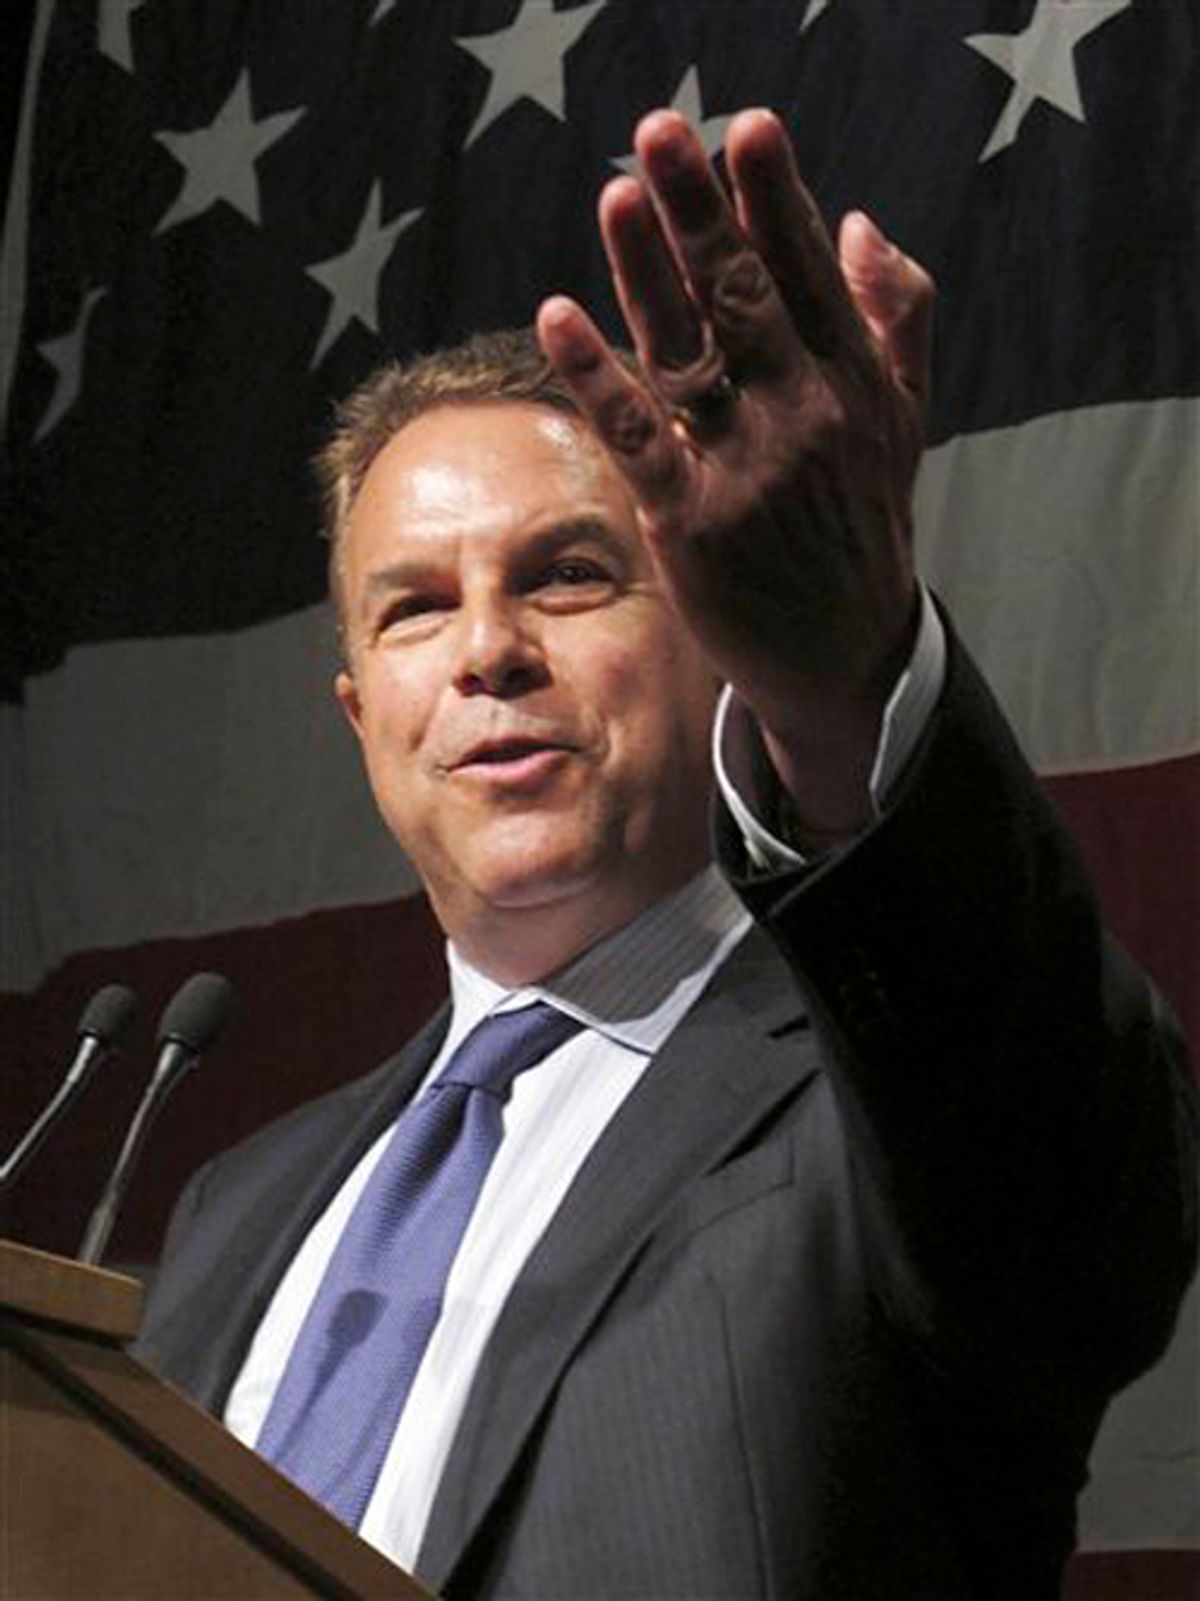 FILE-In this July 17, 2010 file photo, billionaire Jeff Greene, who is challenging Rep. Kendrick Meek for the Democratic Senate nomination, speaks at the Florida Democratic Party's Jefferson-Jackson Dinner  in Hollywood, Fla.  The level of political discourse in the Democratic Senate primary boils down to: Your celebrity friends are low lives. The reply: So's your mom. Four-term Rep. Kendrick Meek and real estate billionaire Jeff Greene have been relentless in criticizing each other, and the vitriol is unlikely to end with Tuesday's primary.(AP Photo/Brendan Farrington, File) (Brendan Farrington)